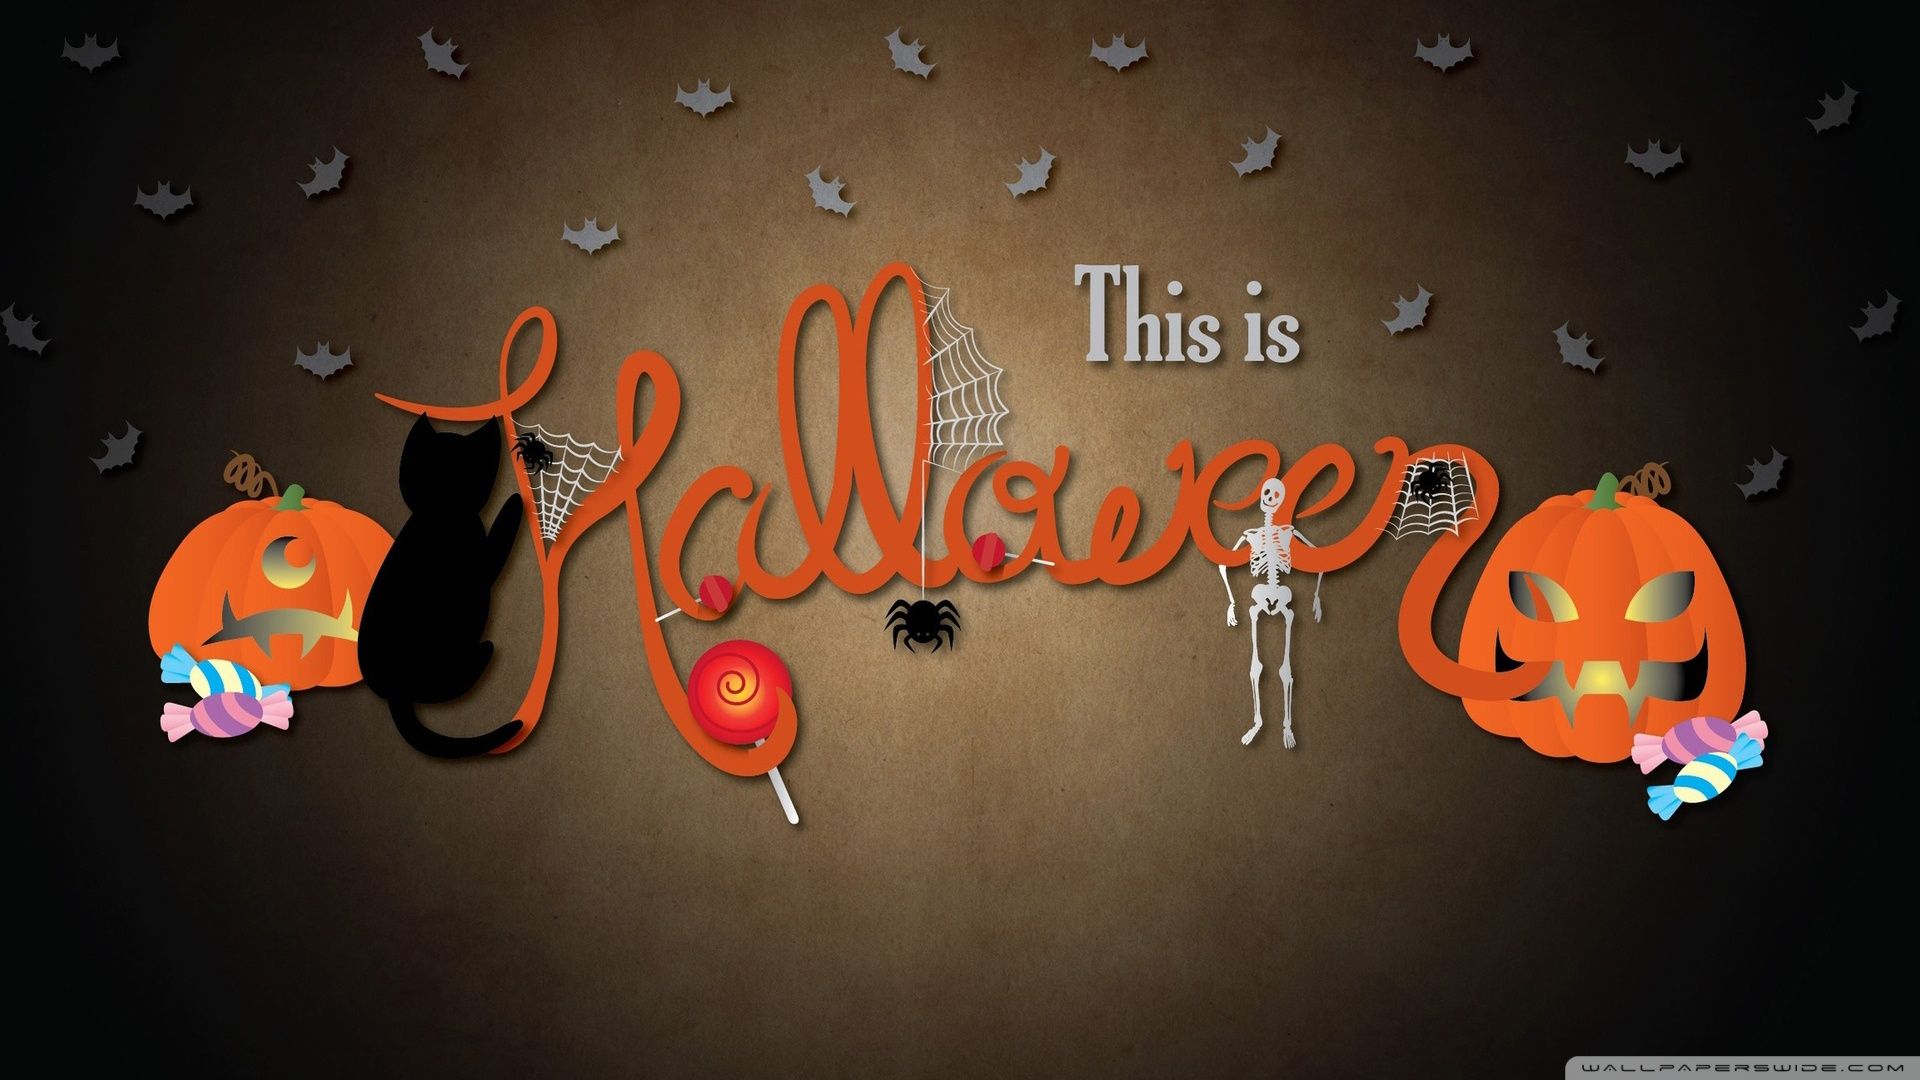 Stunning HD Wallpaper For Your Desktop, Happy Halloween Edition! Have A PC. I Have A PC